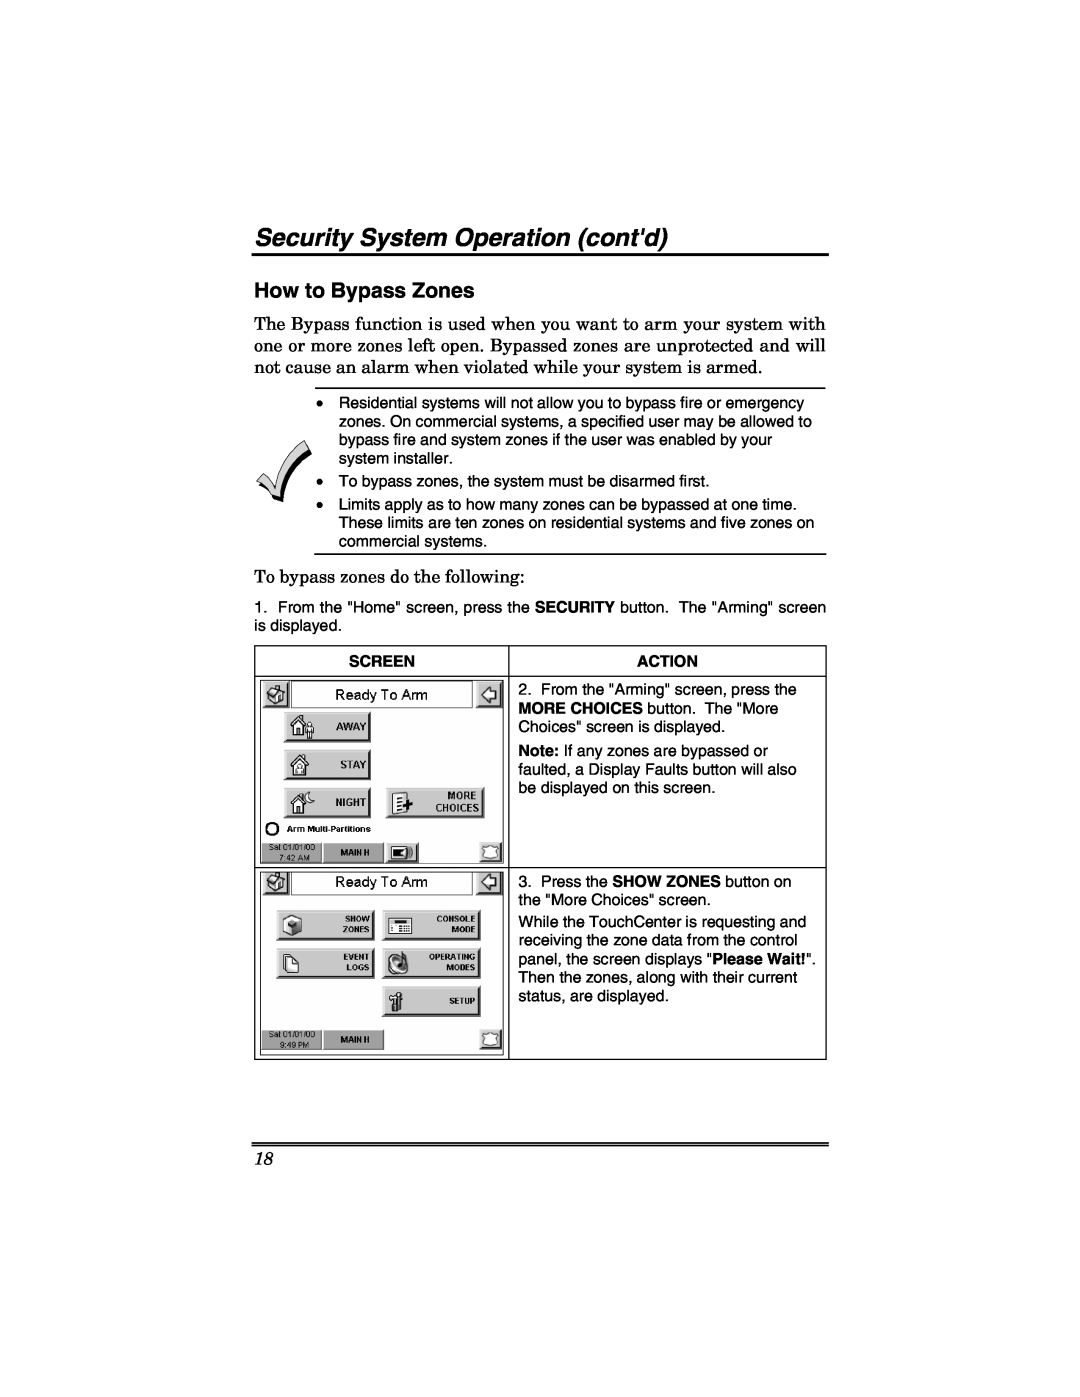 Honeywell 6271V How to Bypass Zones, Security System Operation contd, To bypass zones do the following, Screen, Action 